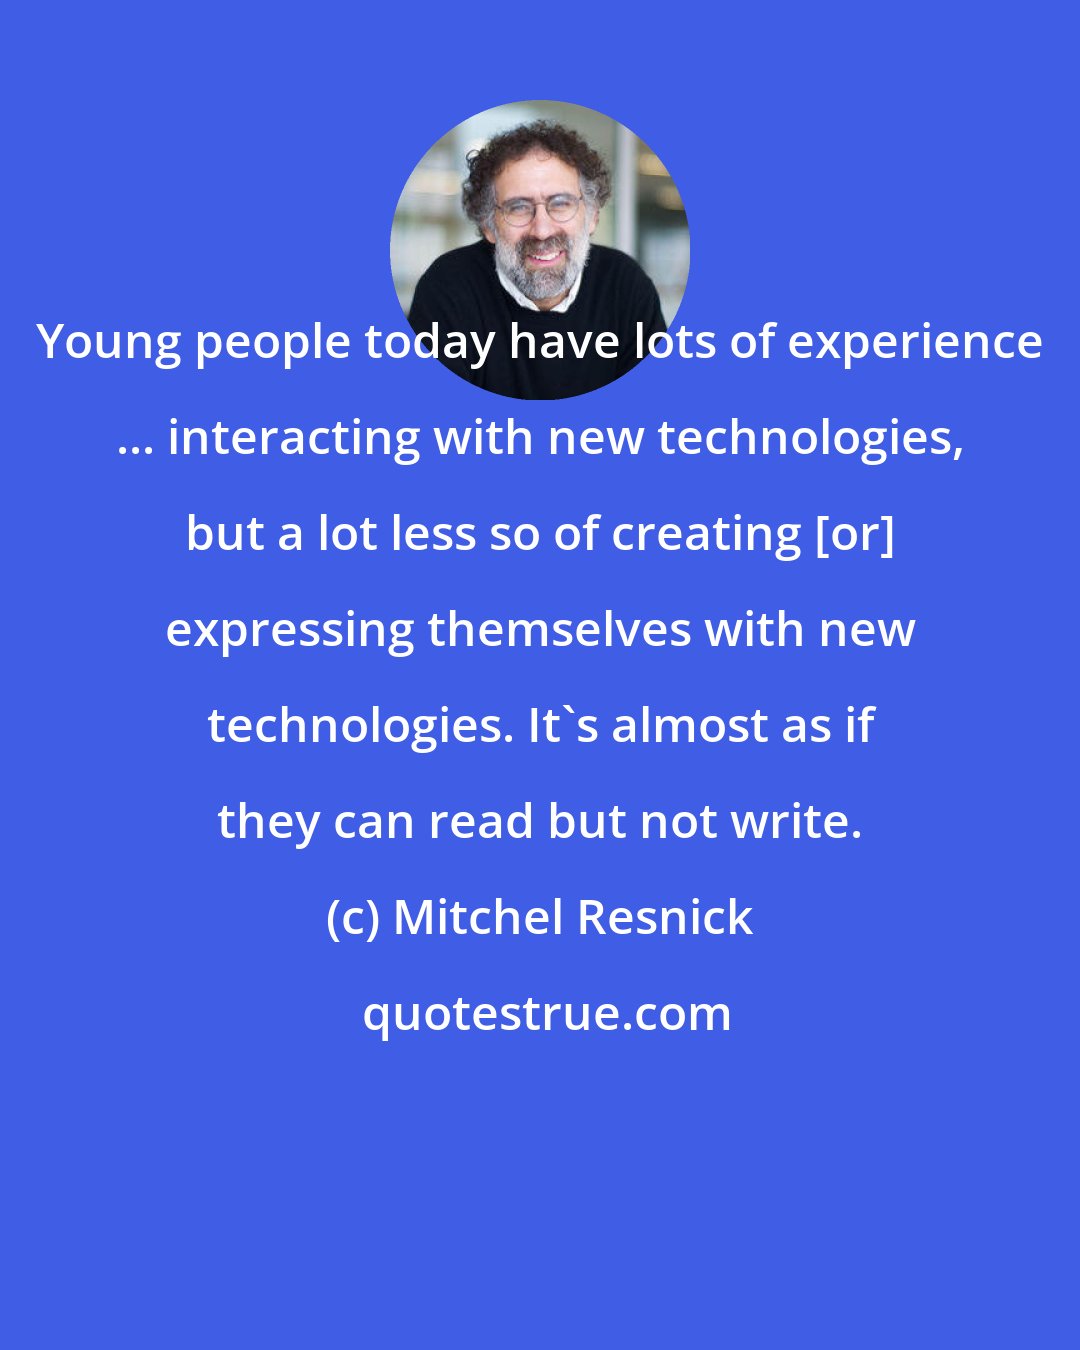 Mitchel Resnick: Young people today have lots of experience ... interacting with new technologies, but a lot less so of creating [or] expressing themselves with new technologies. It's almost as if they can read but not write.